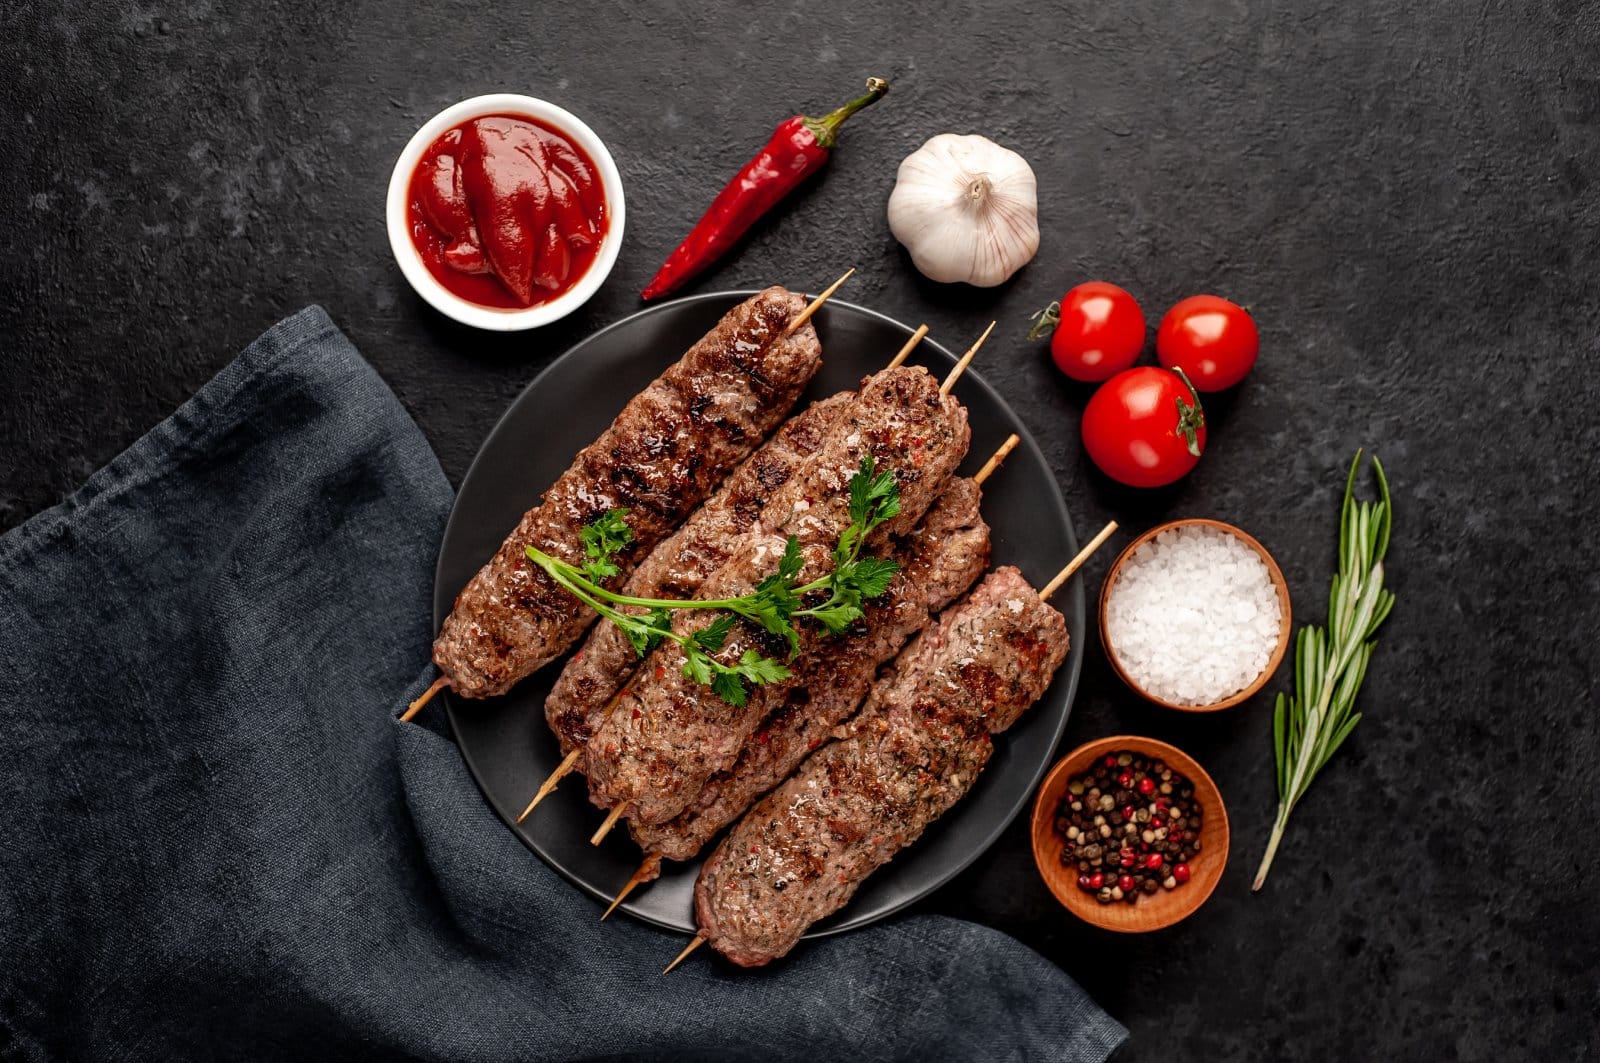 Image Credit: Shutterstock / aleksandr talancev <p><span>Journey to the heart of Castile, a rugged region in central Spain celebrated for its hearty cuisine, robust red wines, and timeless culinary traditions. Sample Castilian tapas classics like cochinillo asado, morcilla de Burgos, and cordero al chilindrón while immersing yourself in the rustic charm of Castilian taverns and mesones.</span></p>